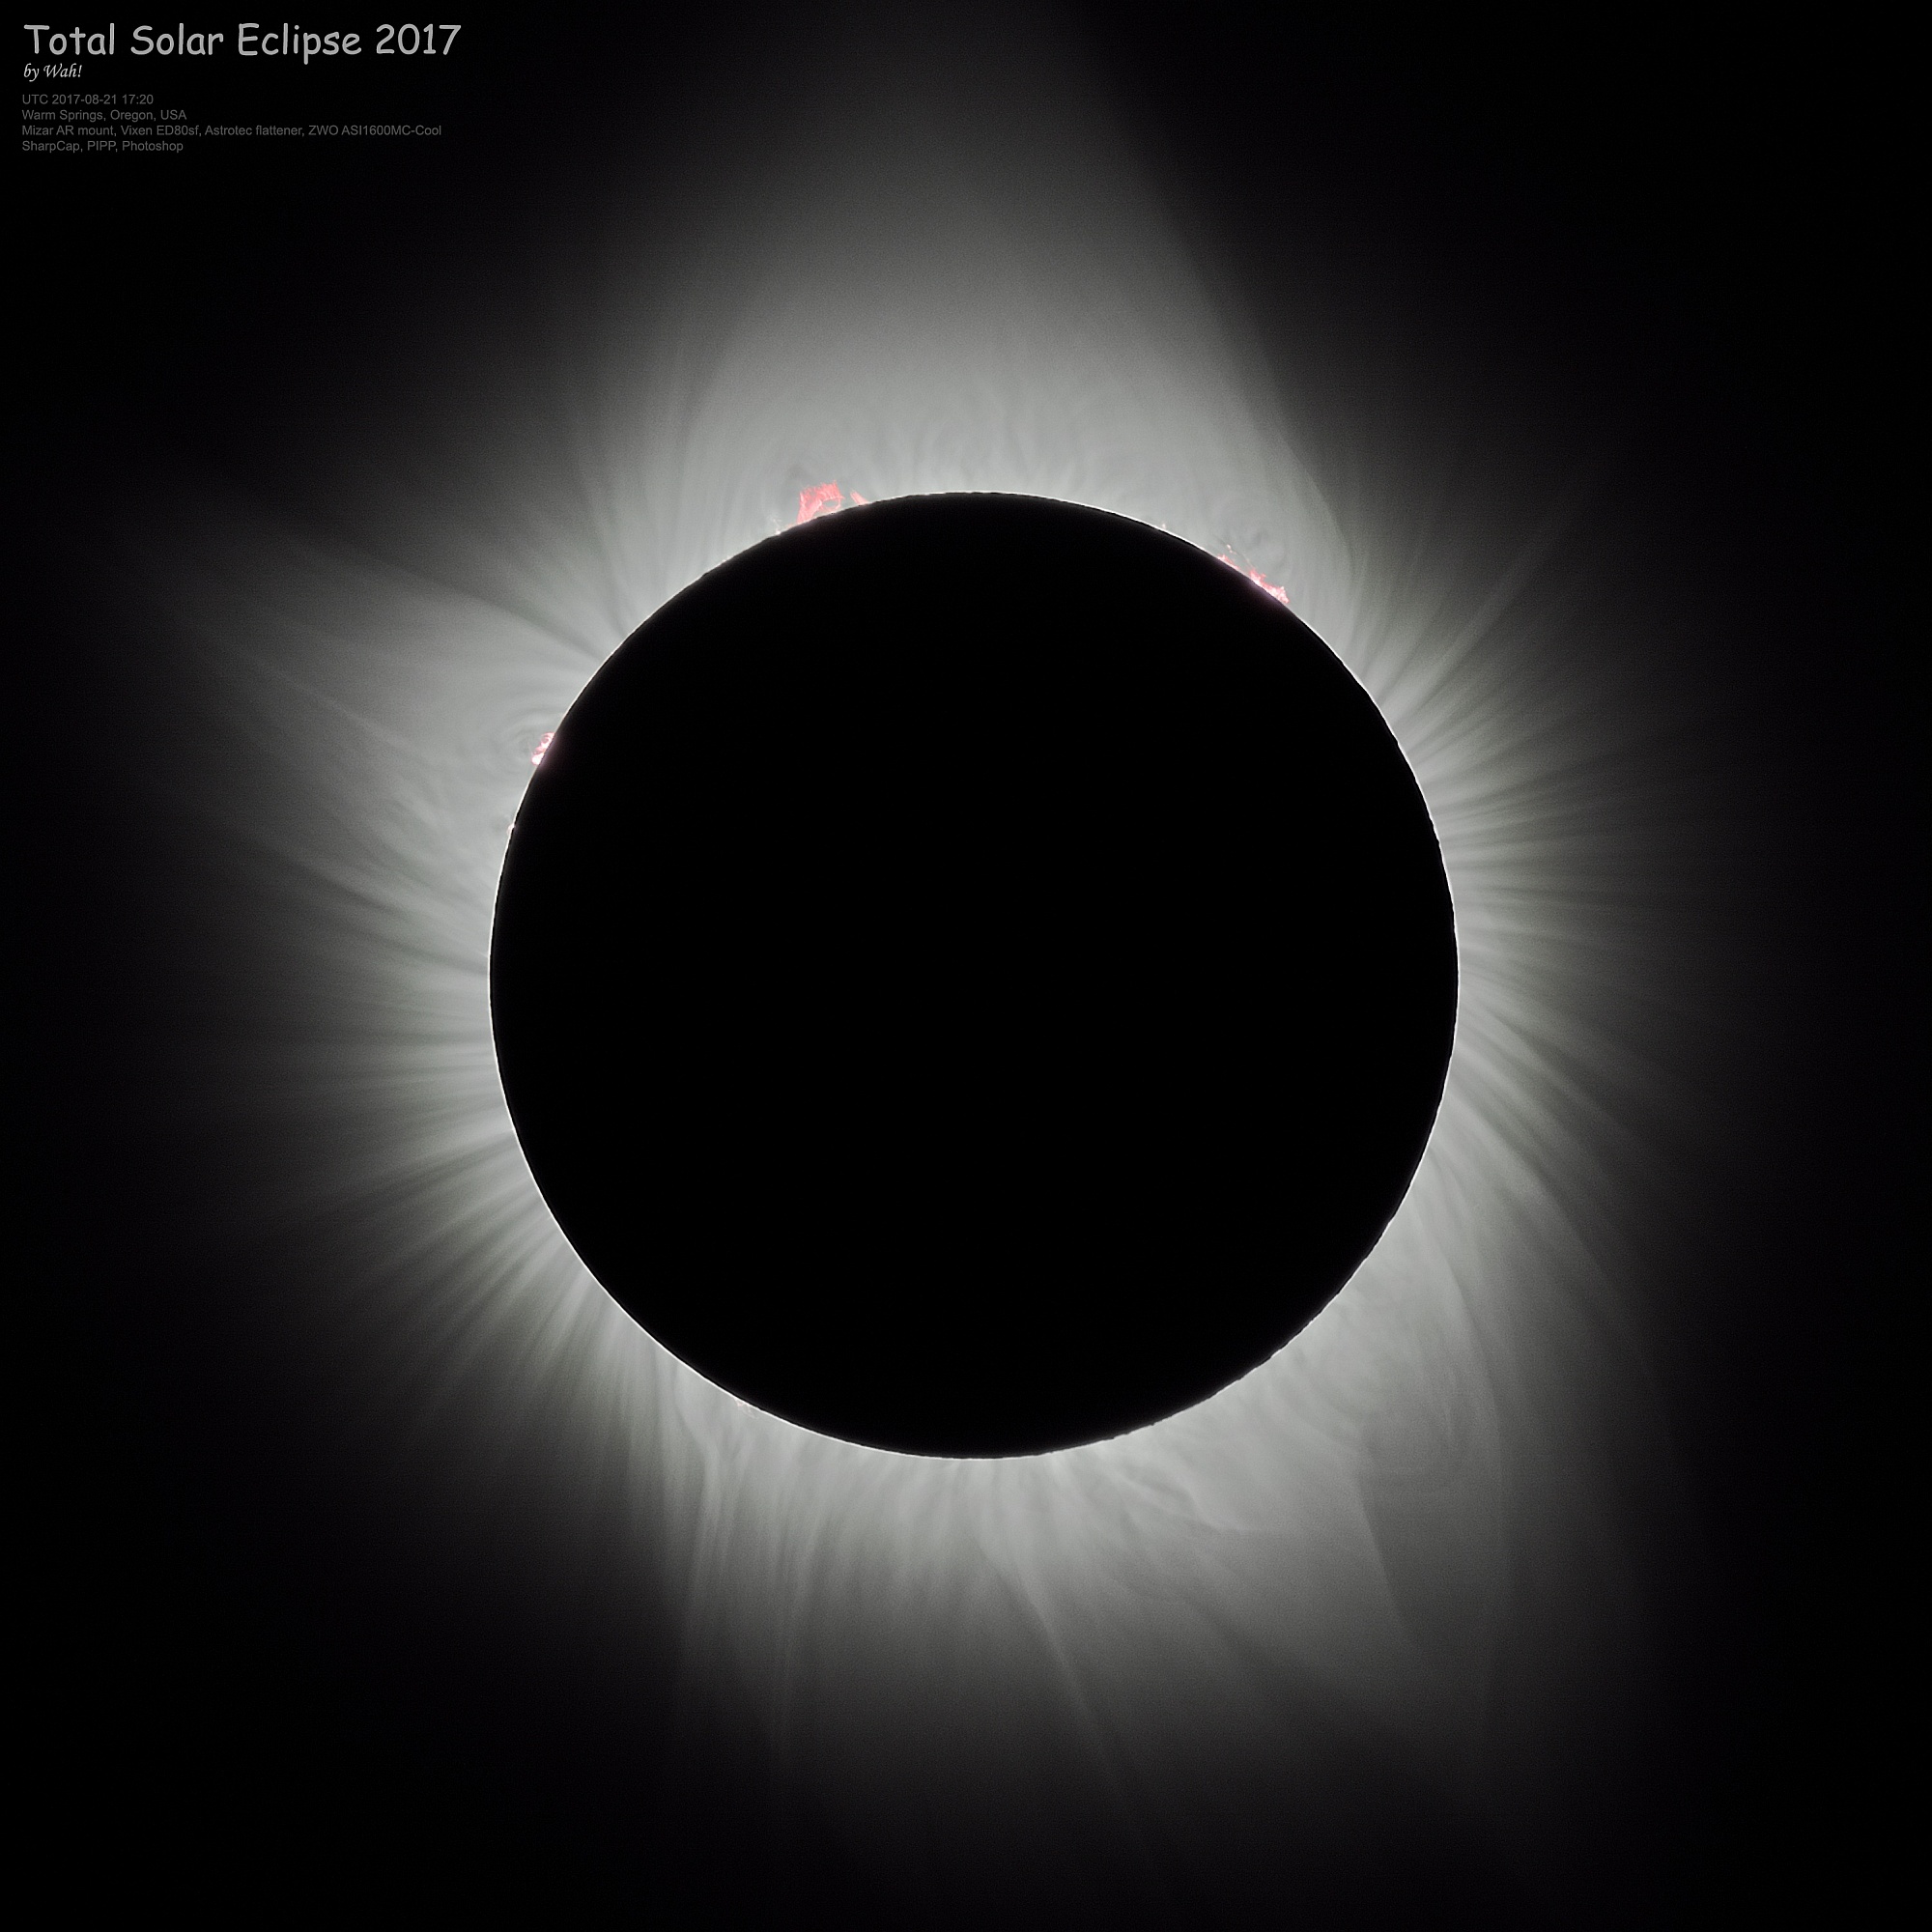 TotalSolarEclipse_ASI1600MC-Cool_20170821_Prominence2s.jpg